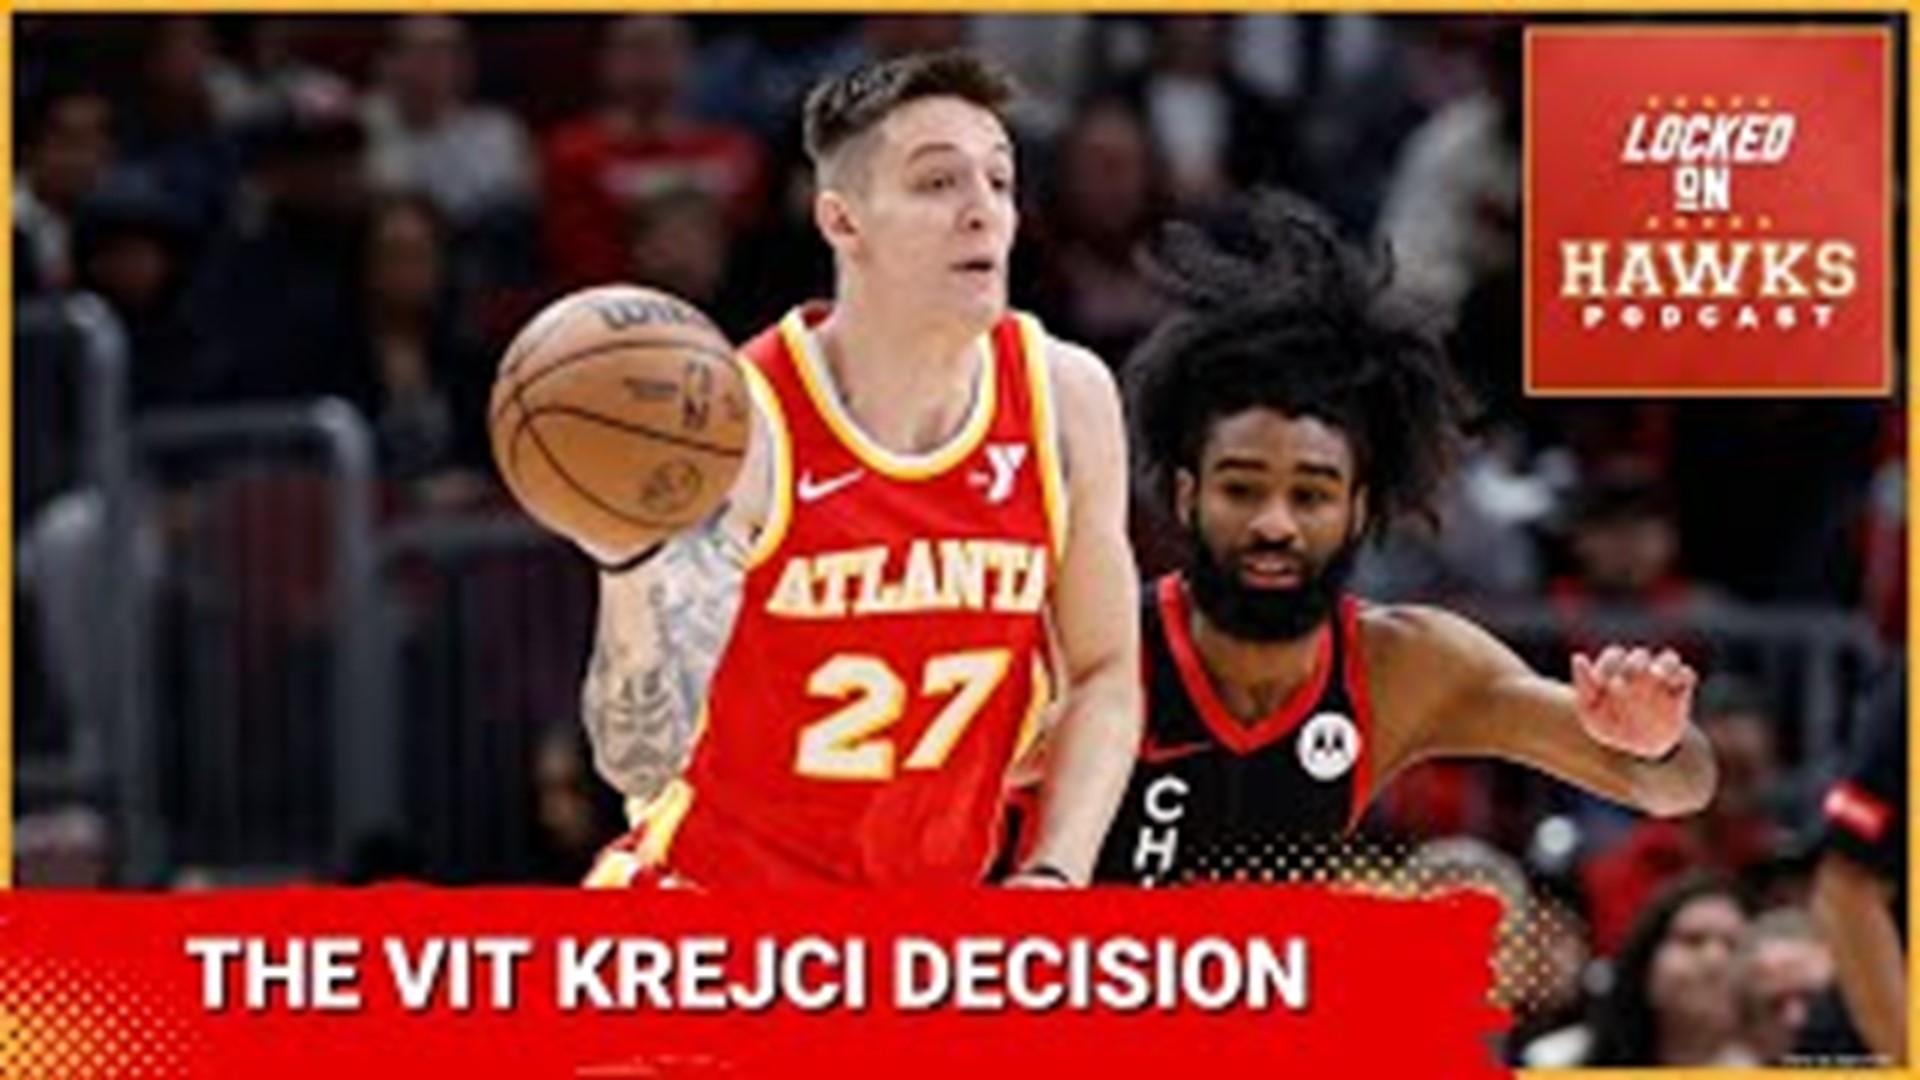 Brad Rowland  hosts episode No. 1686 of the Locked on Hawks podcast. The show touches on Vit Krejci's breakout and a big decision for the Atlanta Hawks.